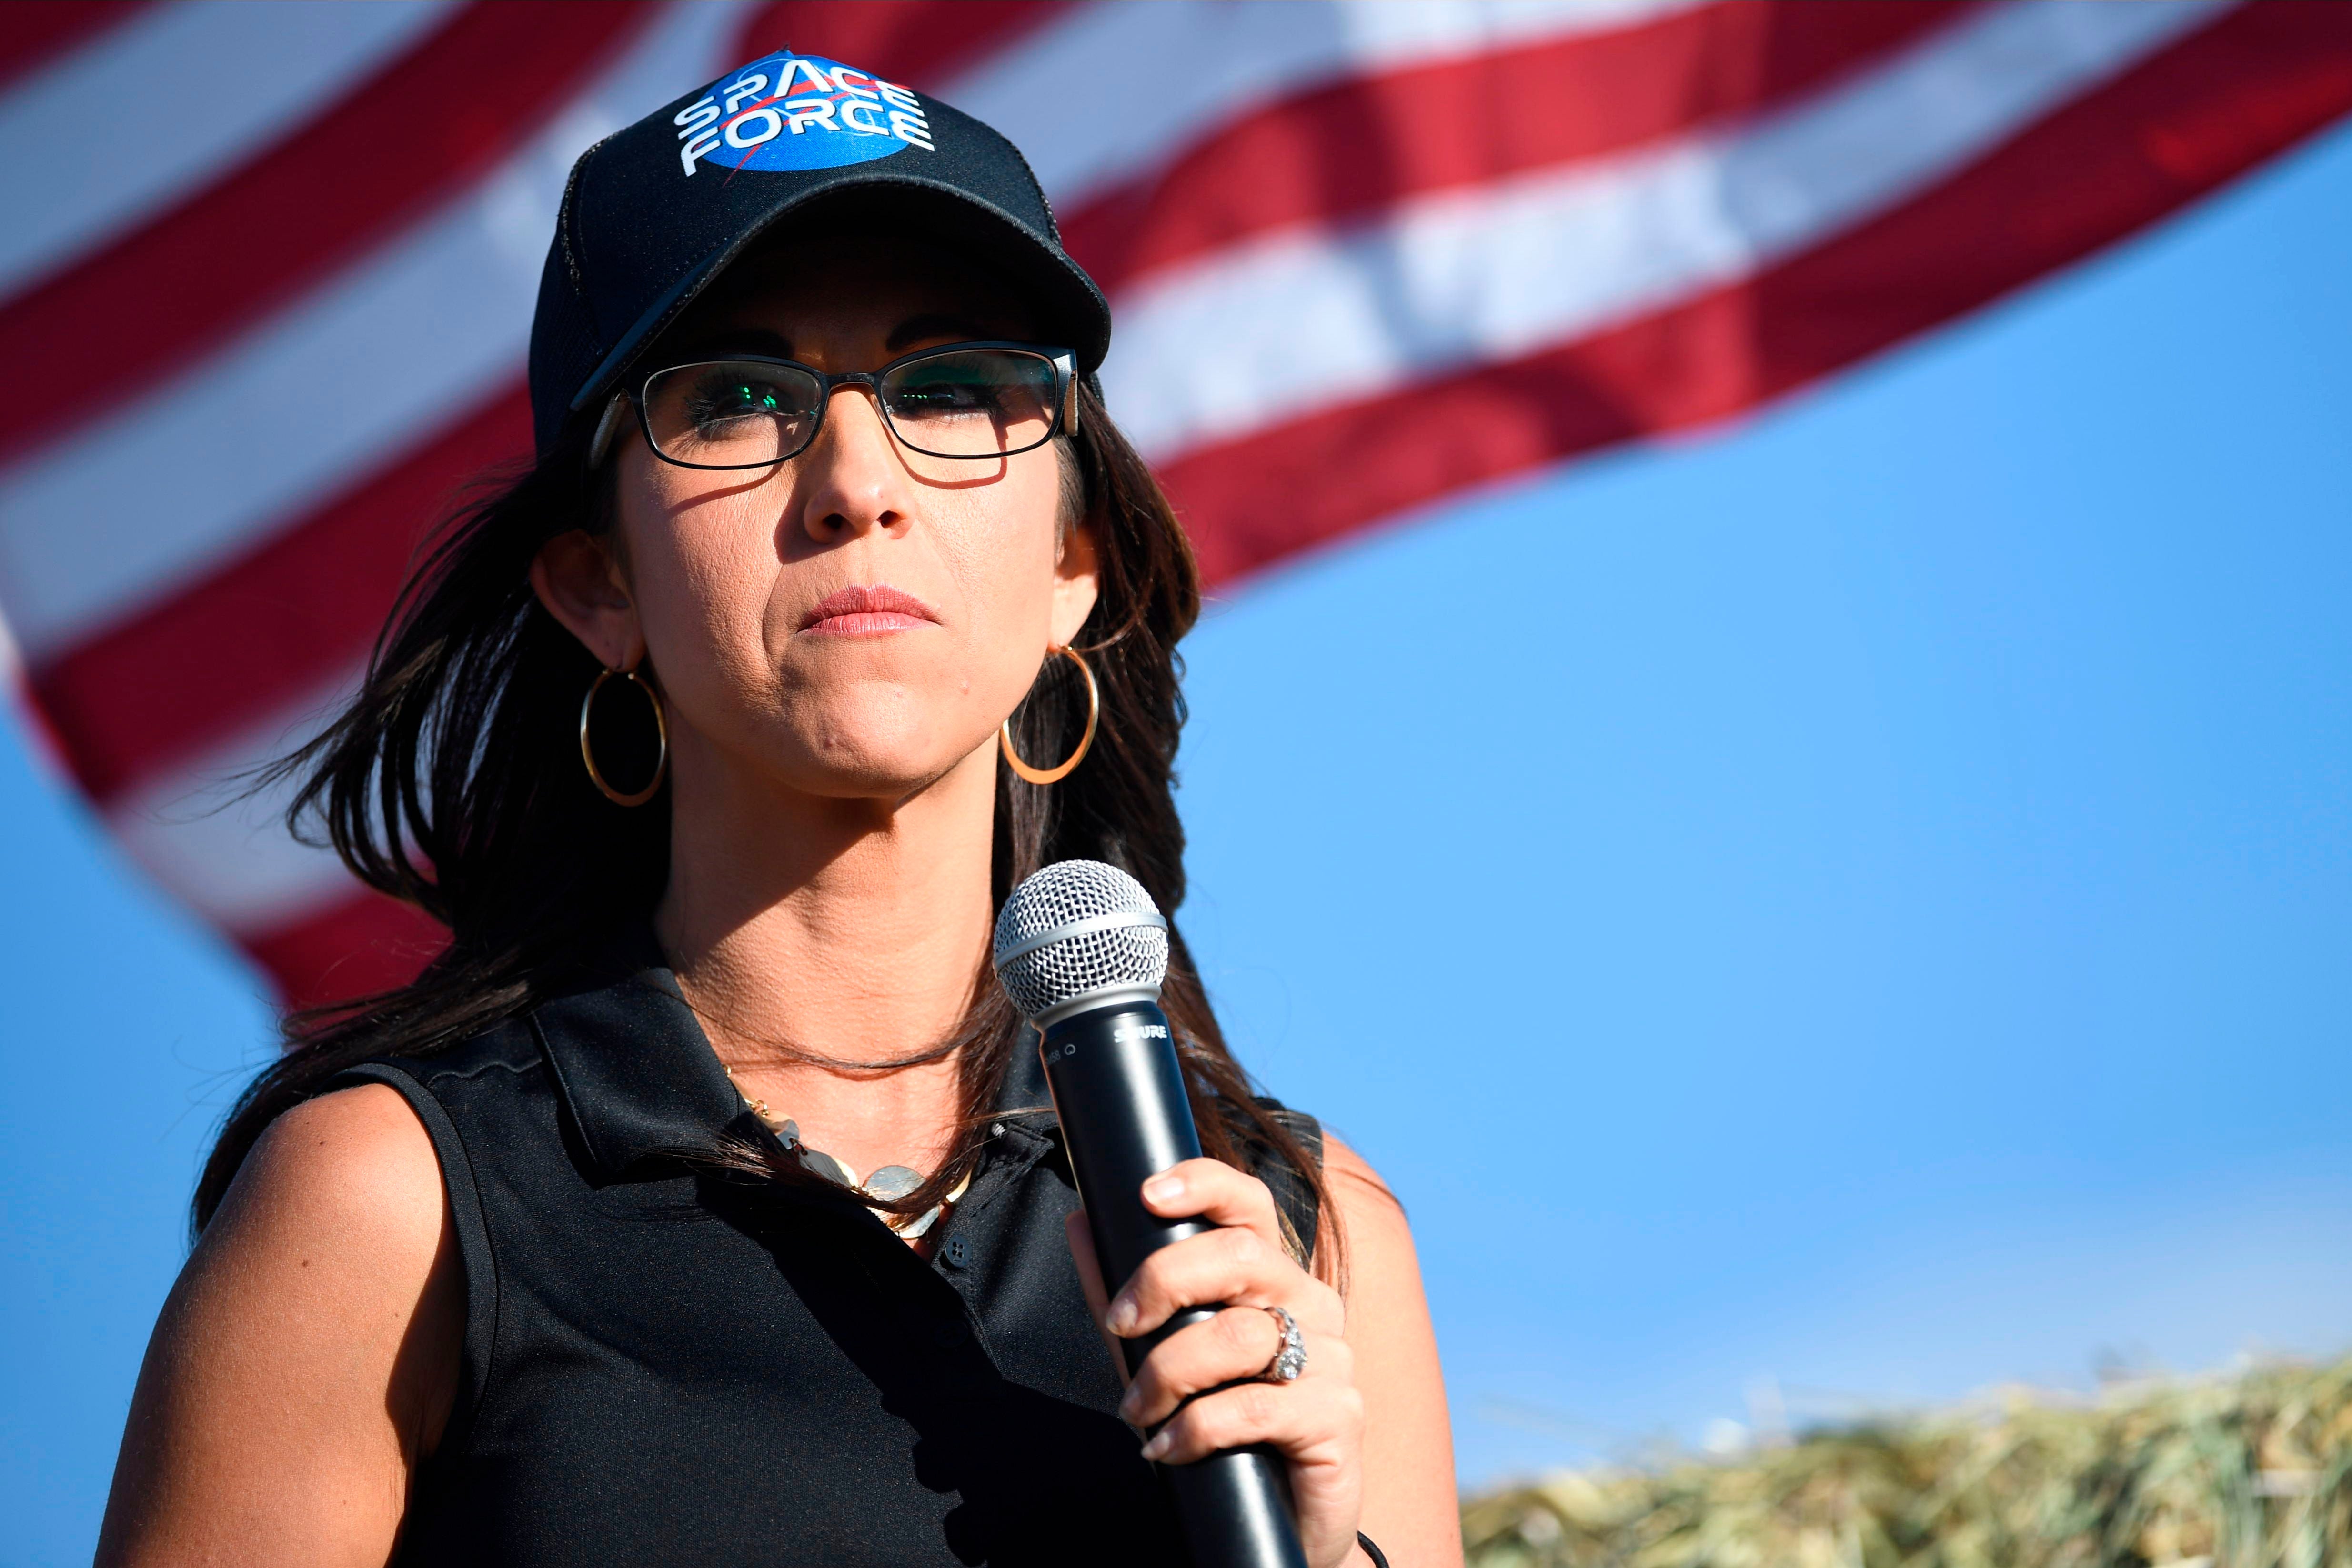 File Image: Lauren Boebert, the Republican candidate for the US House of Representatives seat in Colorado's 3rd Congressional District, addresses supporters during a campaign rally in Colona, Colorado on 10 October 2020